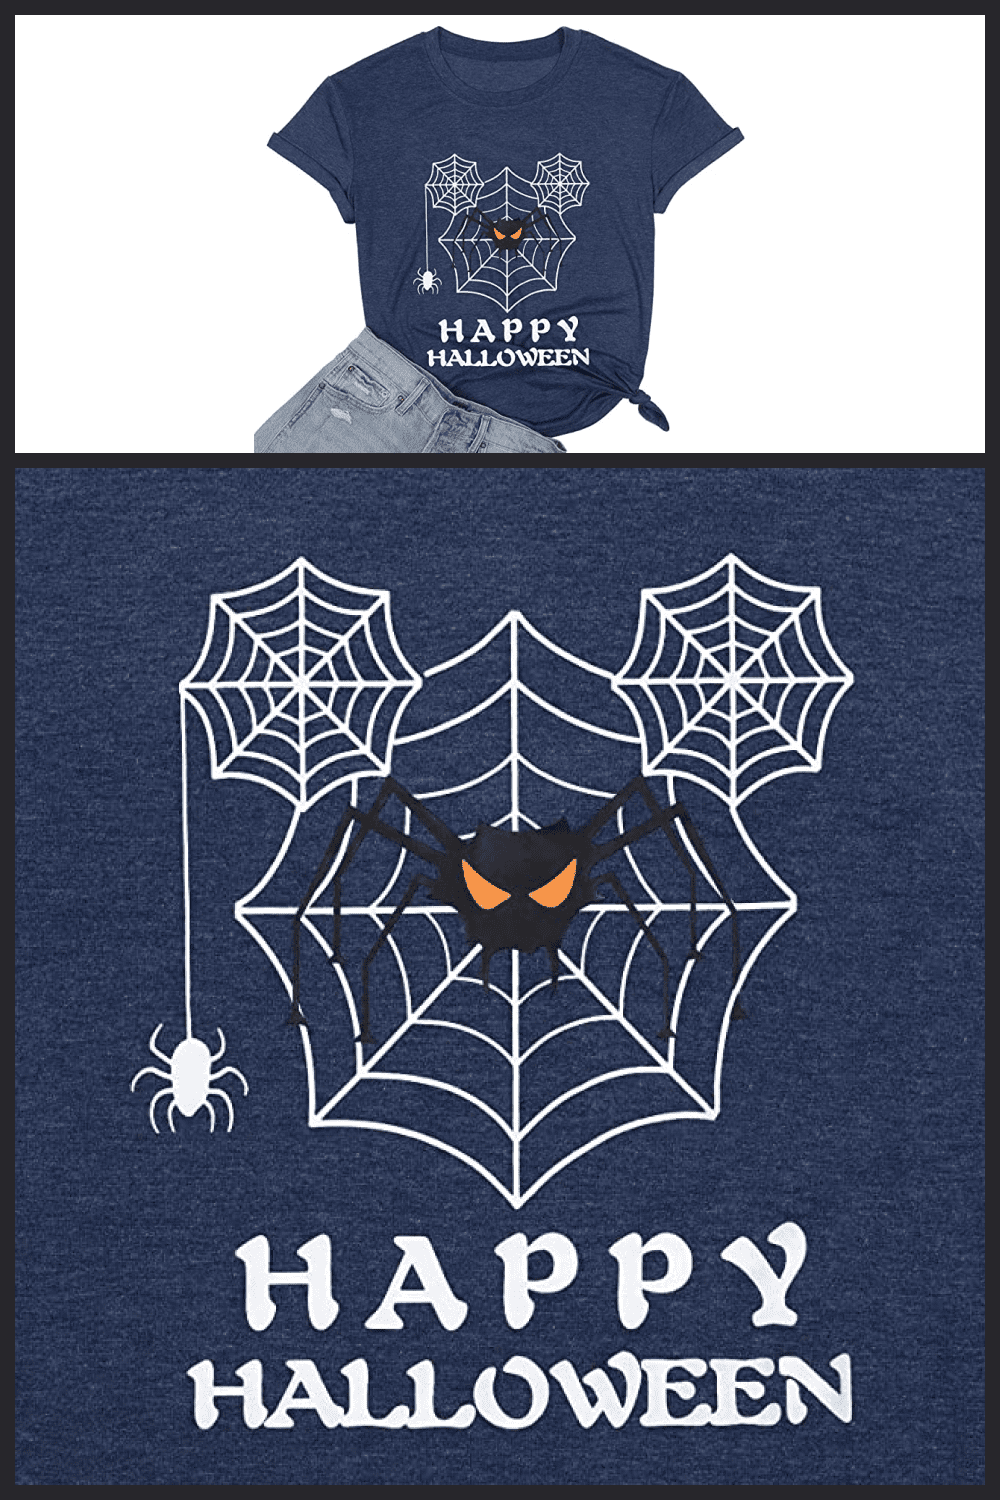 Blue T-shirt with large white web and black spider.